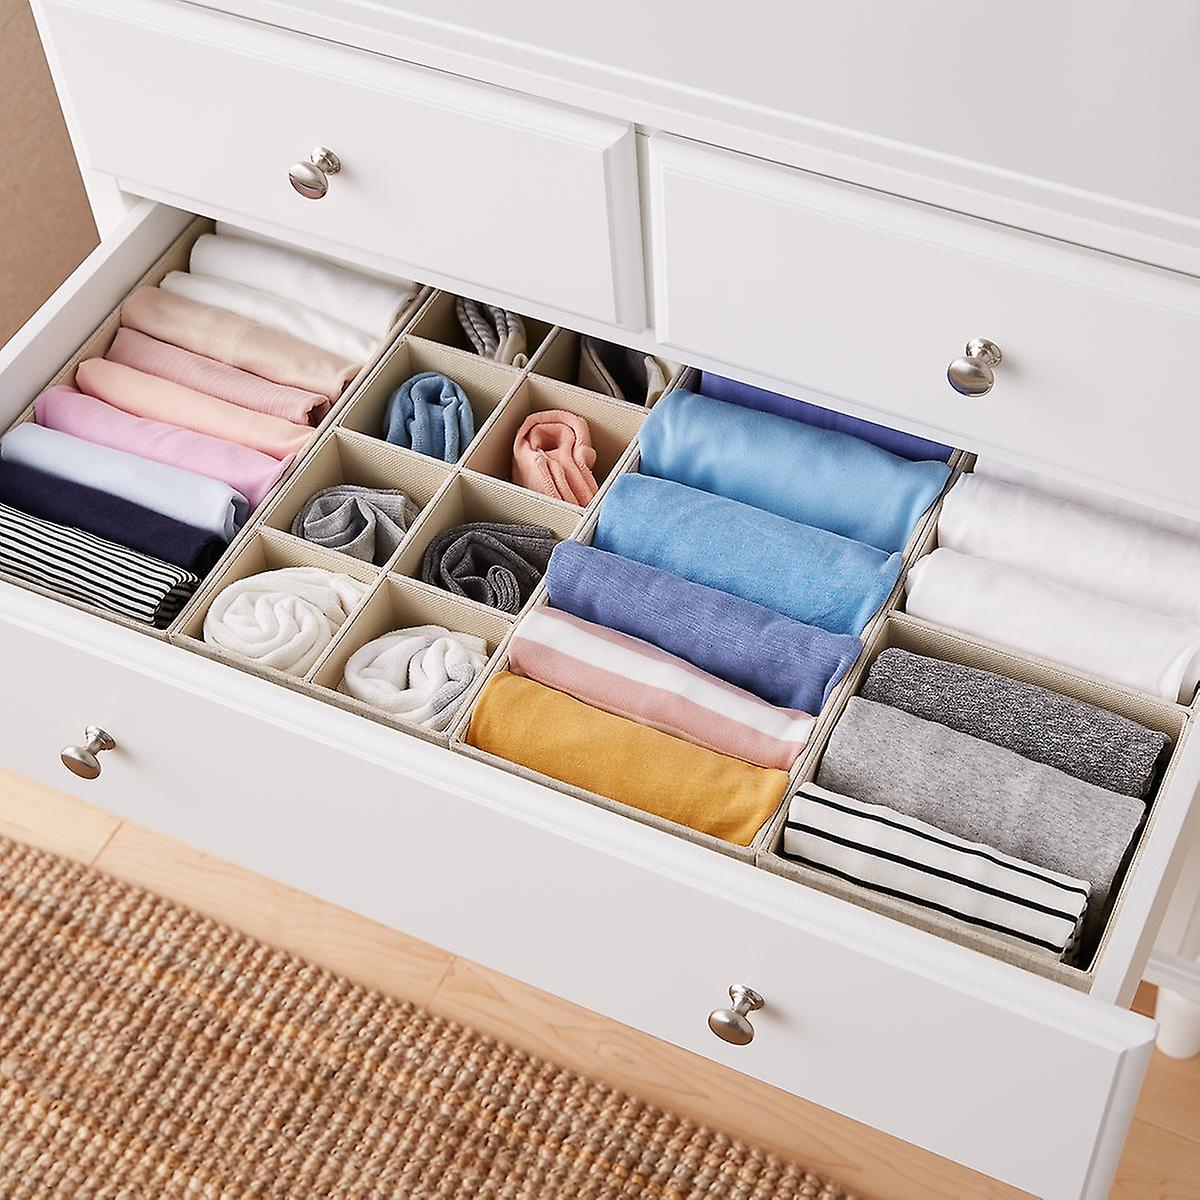 28 X 14 Linen Drawer Organization Solution The Container Store